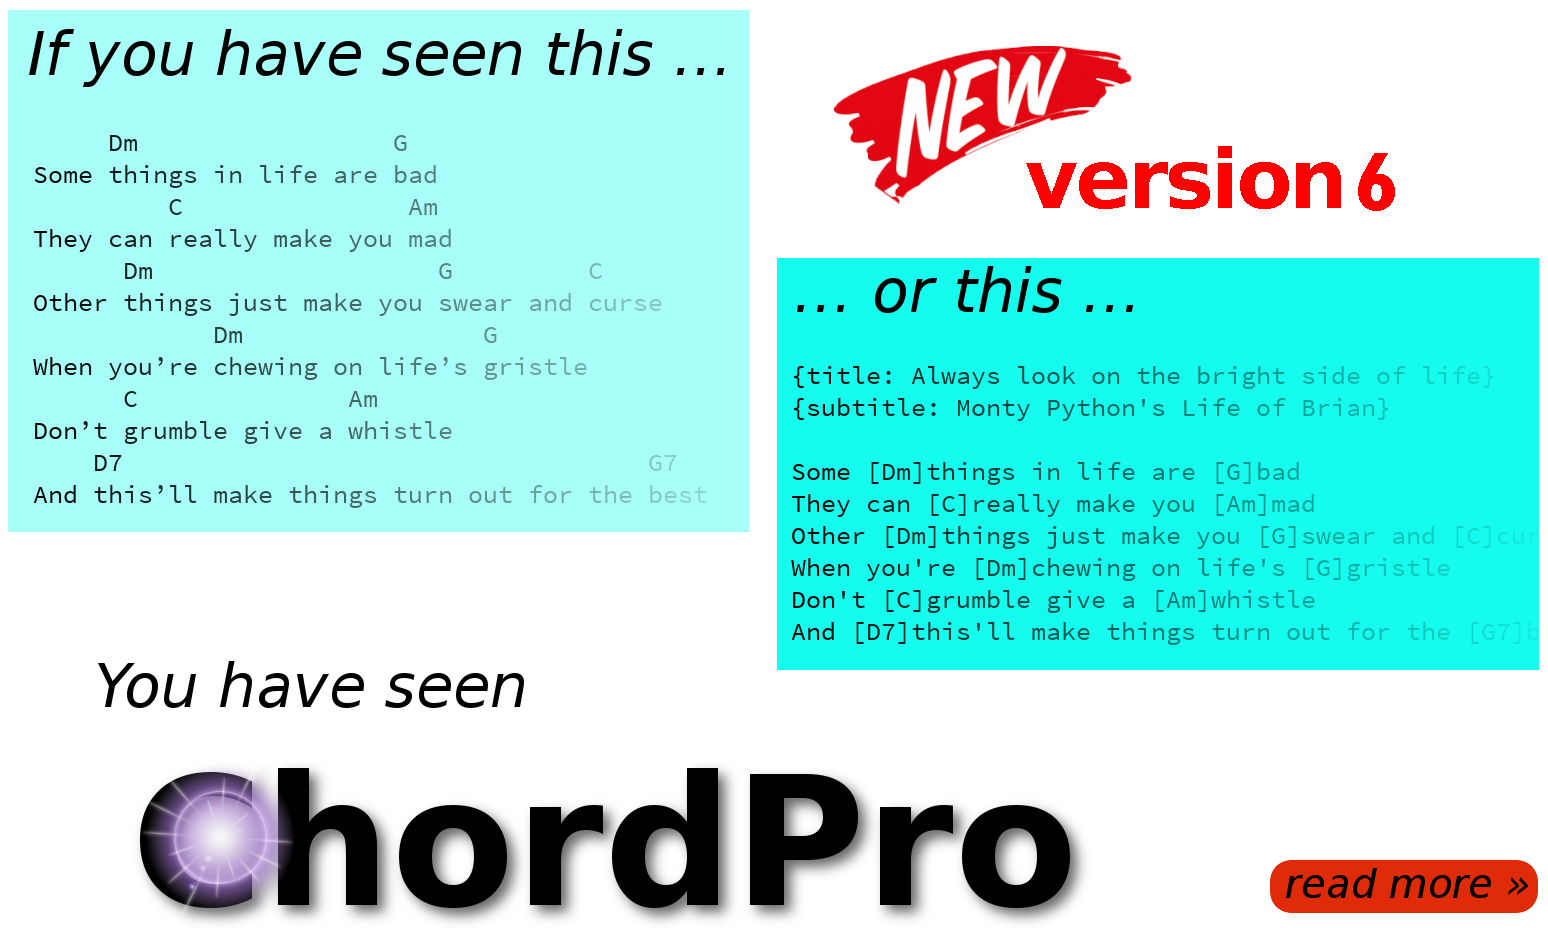 This is the official site for ChordPro, a simple text format for the notation of lyrics with chords. Although primarily intended for guitarists, it can be used for all kinds of musical purposes.